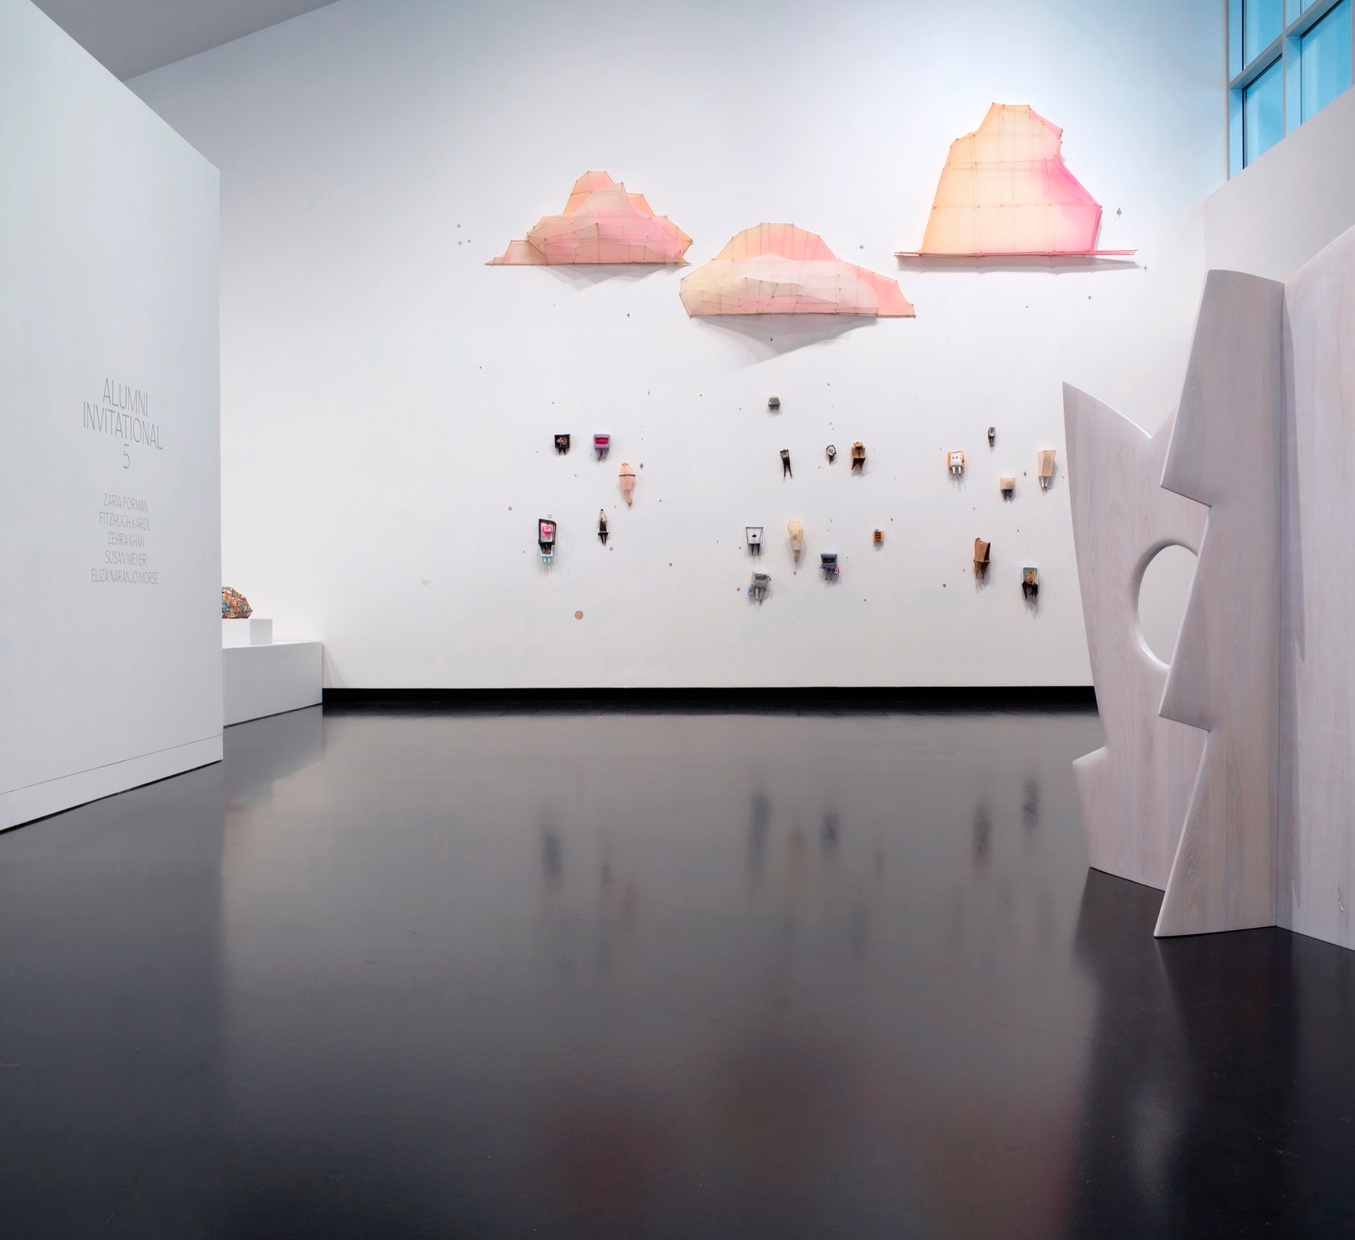 Displayed in a museum gallery is a white, jagged, geometric sculpture in front of many small sculptures that hang on a white wall below pink sculptural clouds.